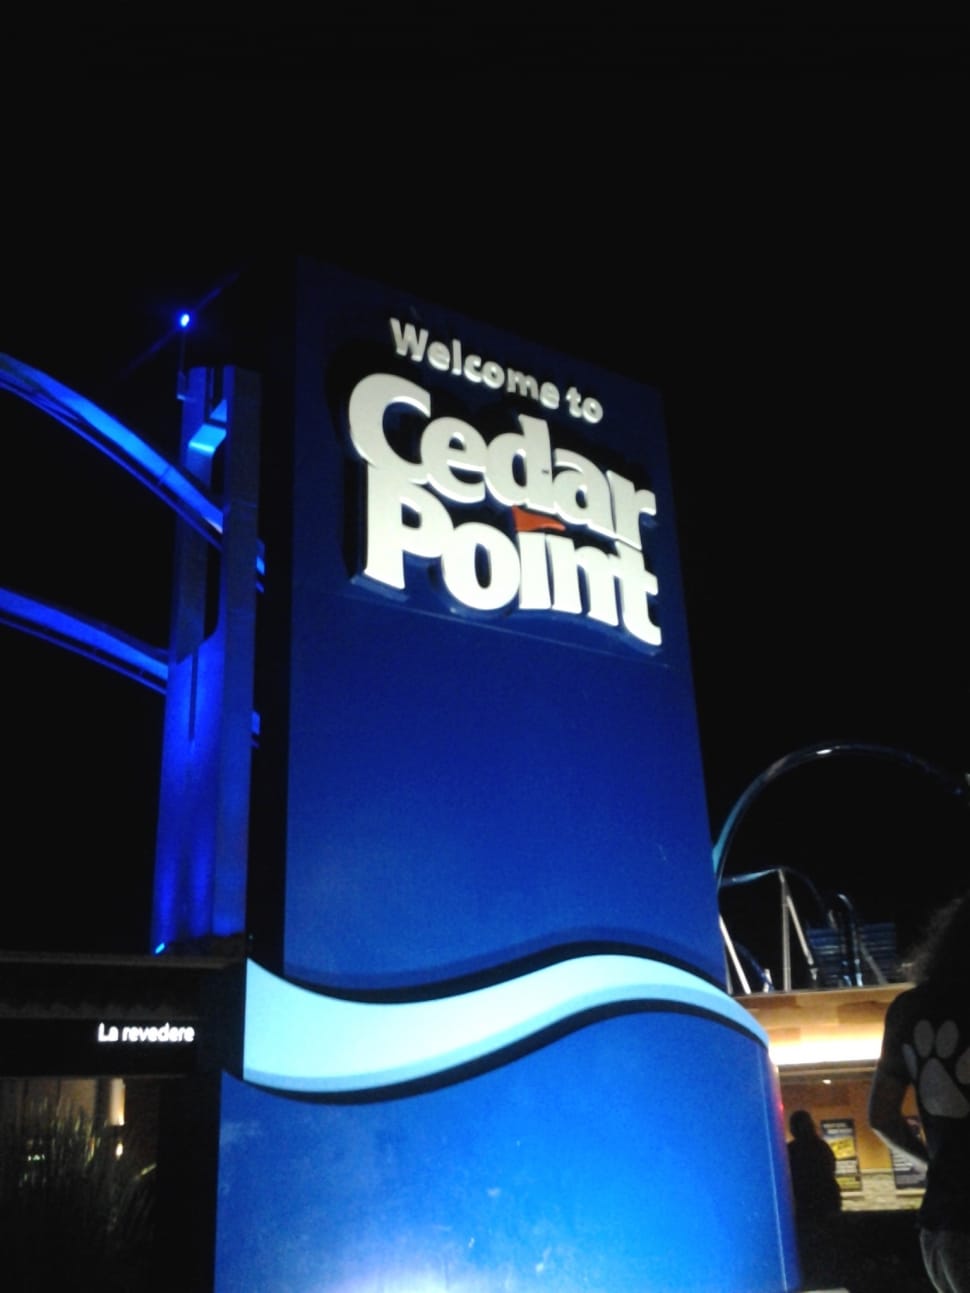 welcome to cedar point signage preview